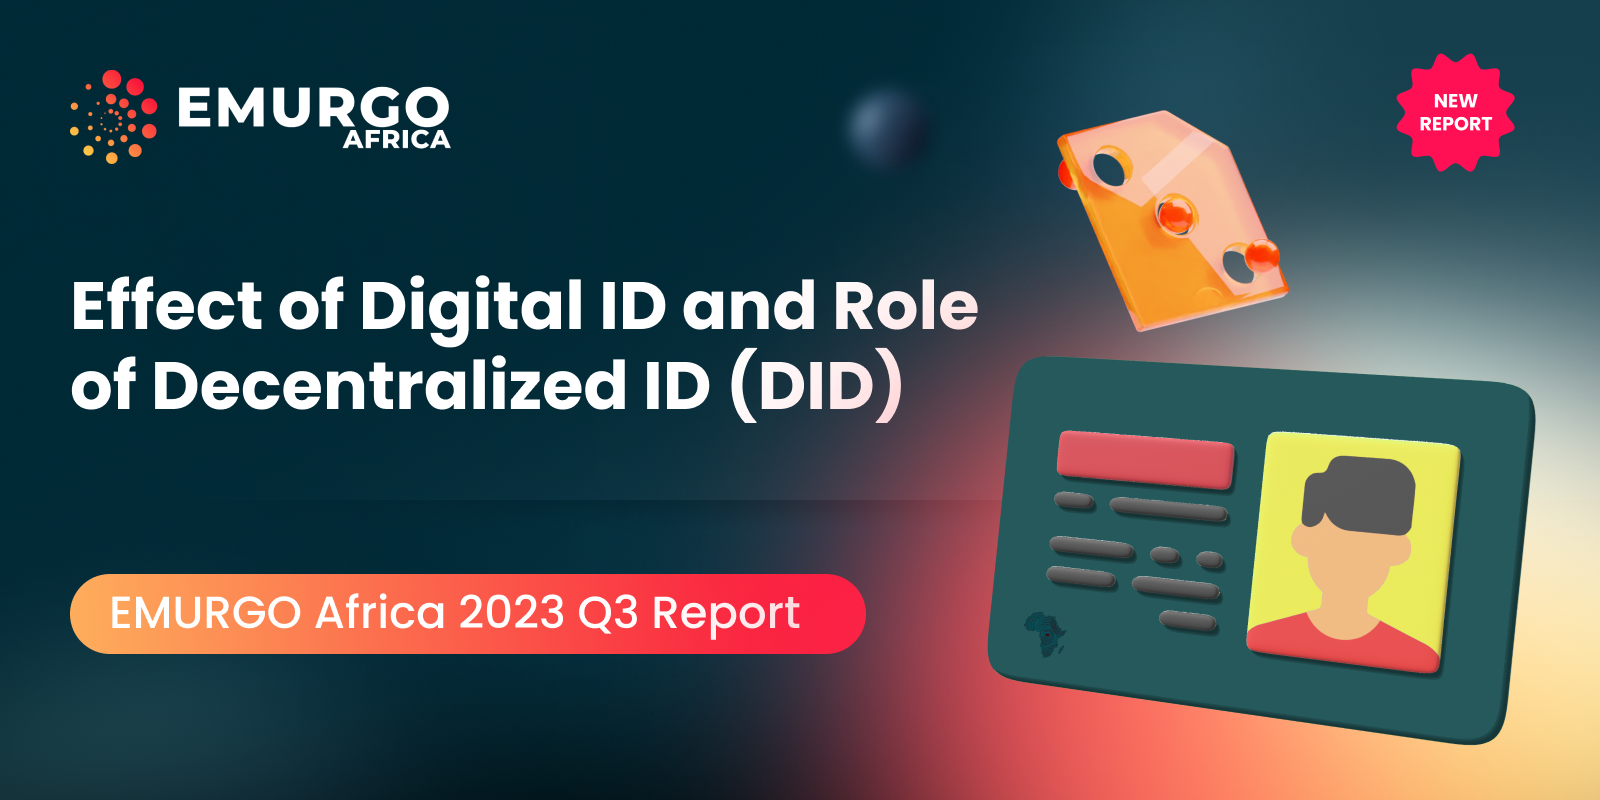 EMURGO Africa 2023 Q3 Report: Effect of Digital ID and Role of Decentralized ID (DID) in African